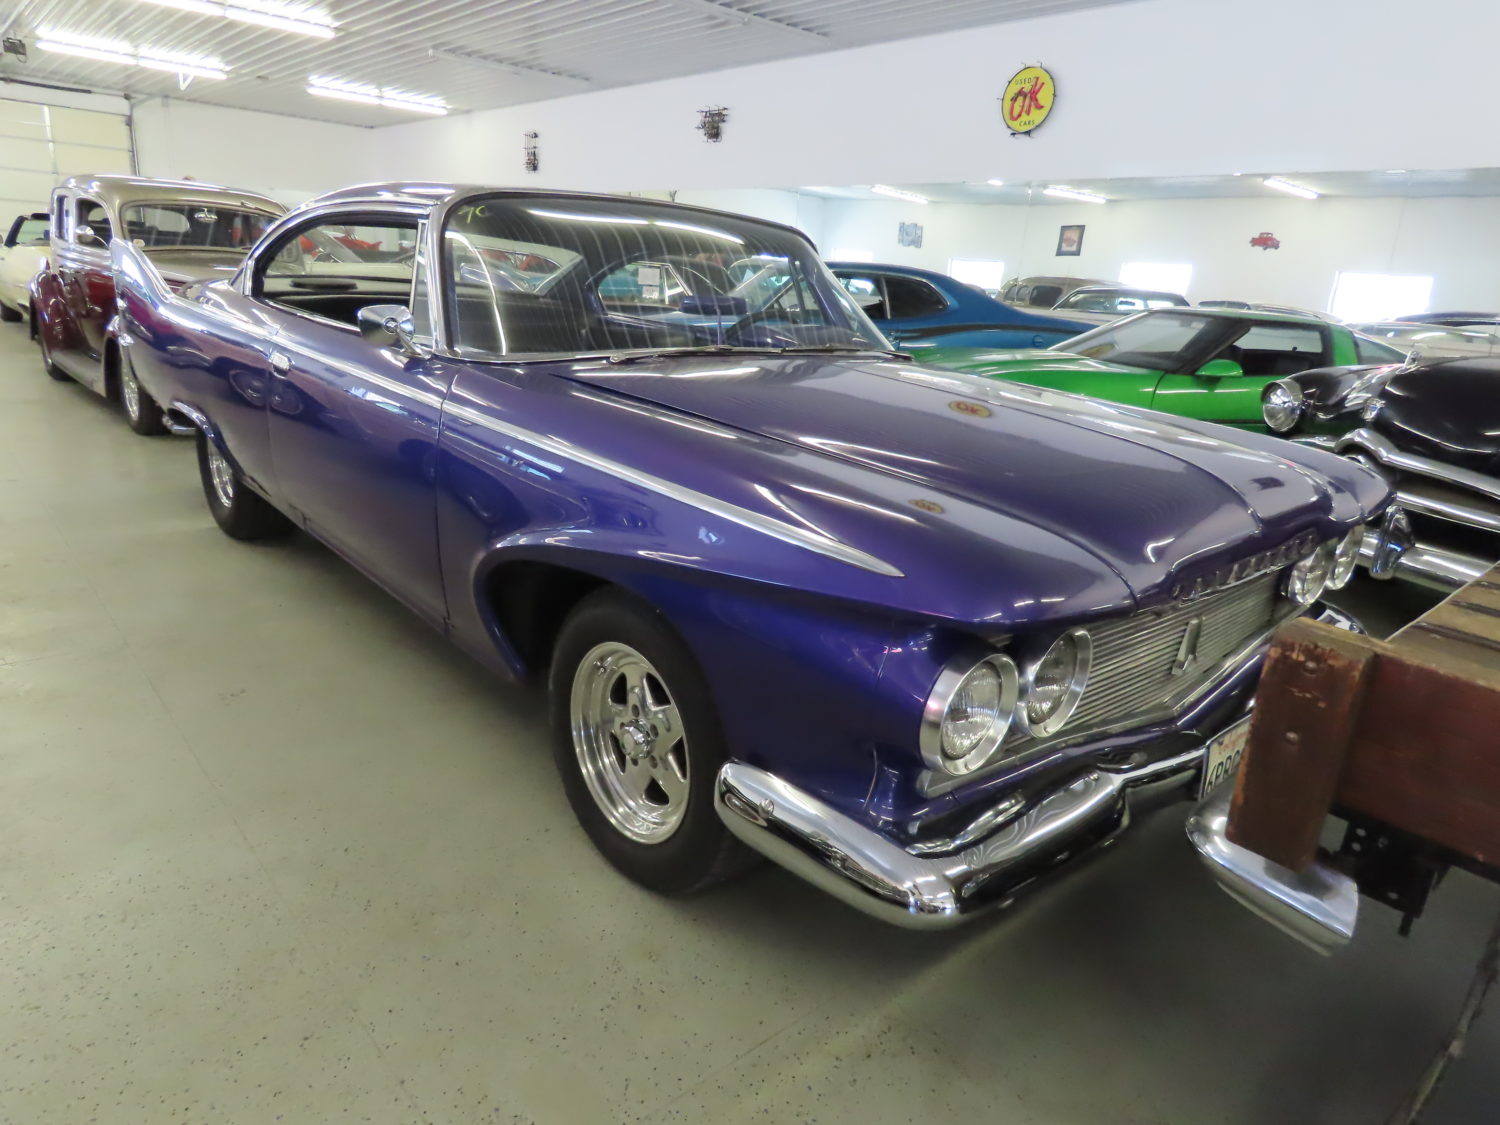 Approx. 100 American Classics Cars At Auction! The Sorensen Collection-LIVE ONSITE W/ONLINE BIDDING!  - image 13